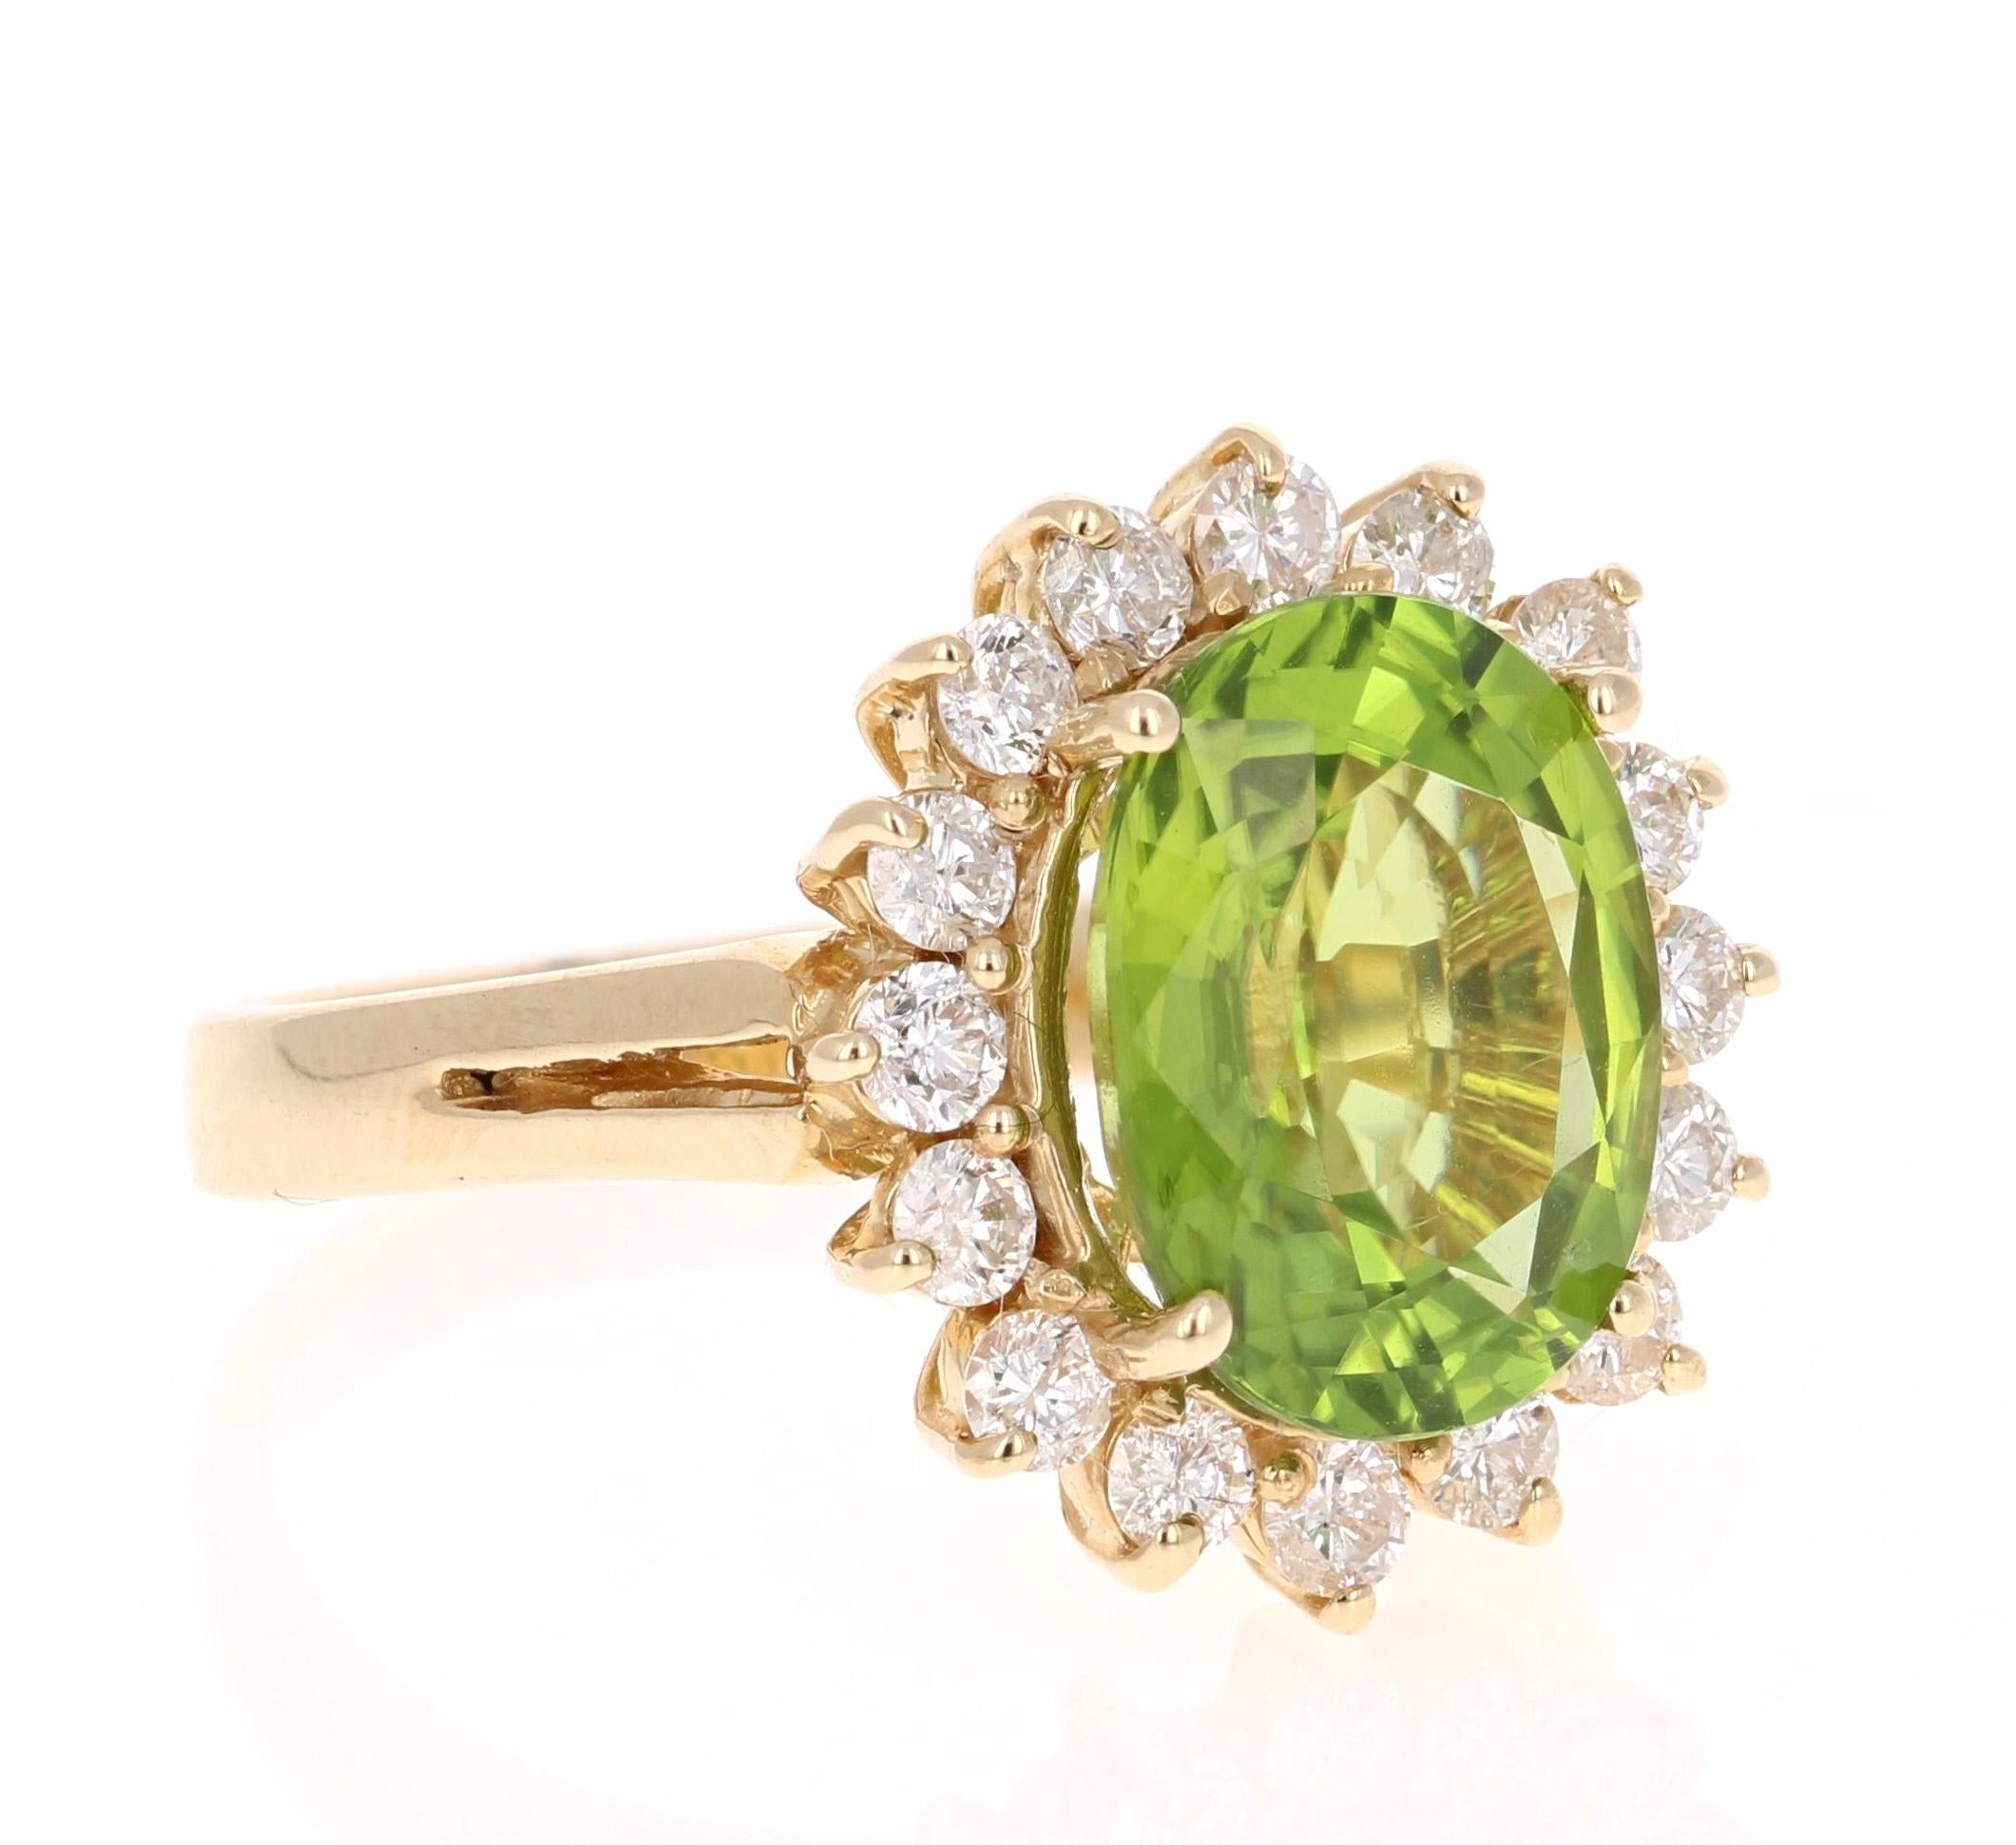 6.14 Carat Peridot Diamond Ballerina Yellow Gold Ring


This beautiful ring has a large Oval Cut Peridot in the center that weighs 5.25 carats. The ring is surrounded by 16 Round Cut Diamonds that weigh 0.89 carat.  The total carat weight of this